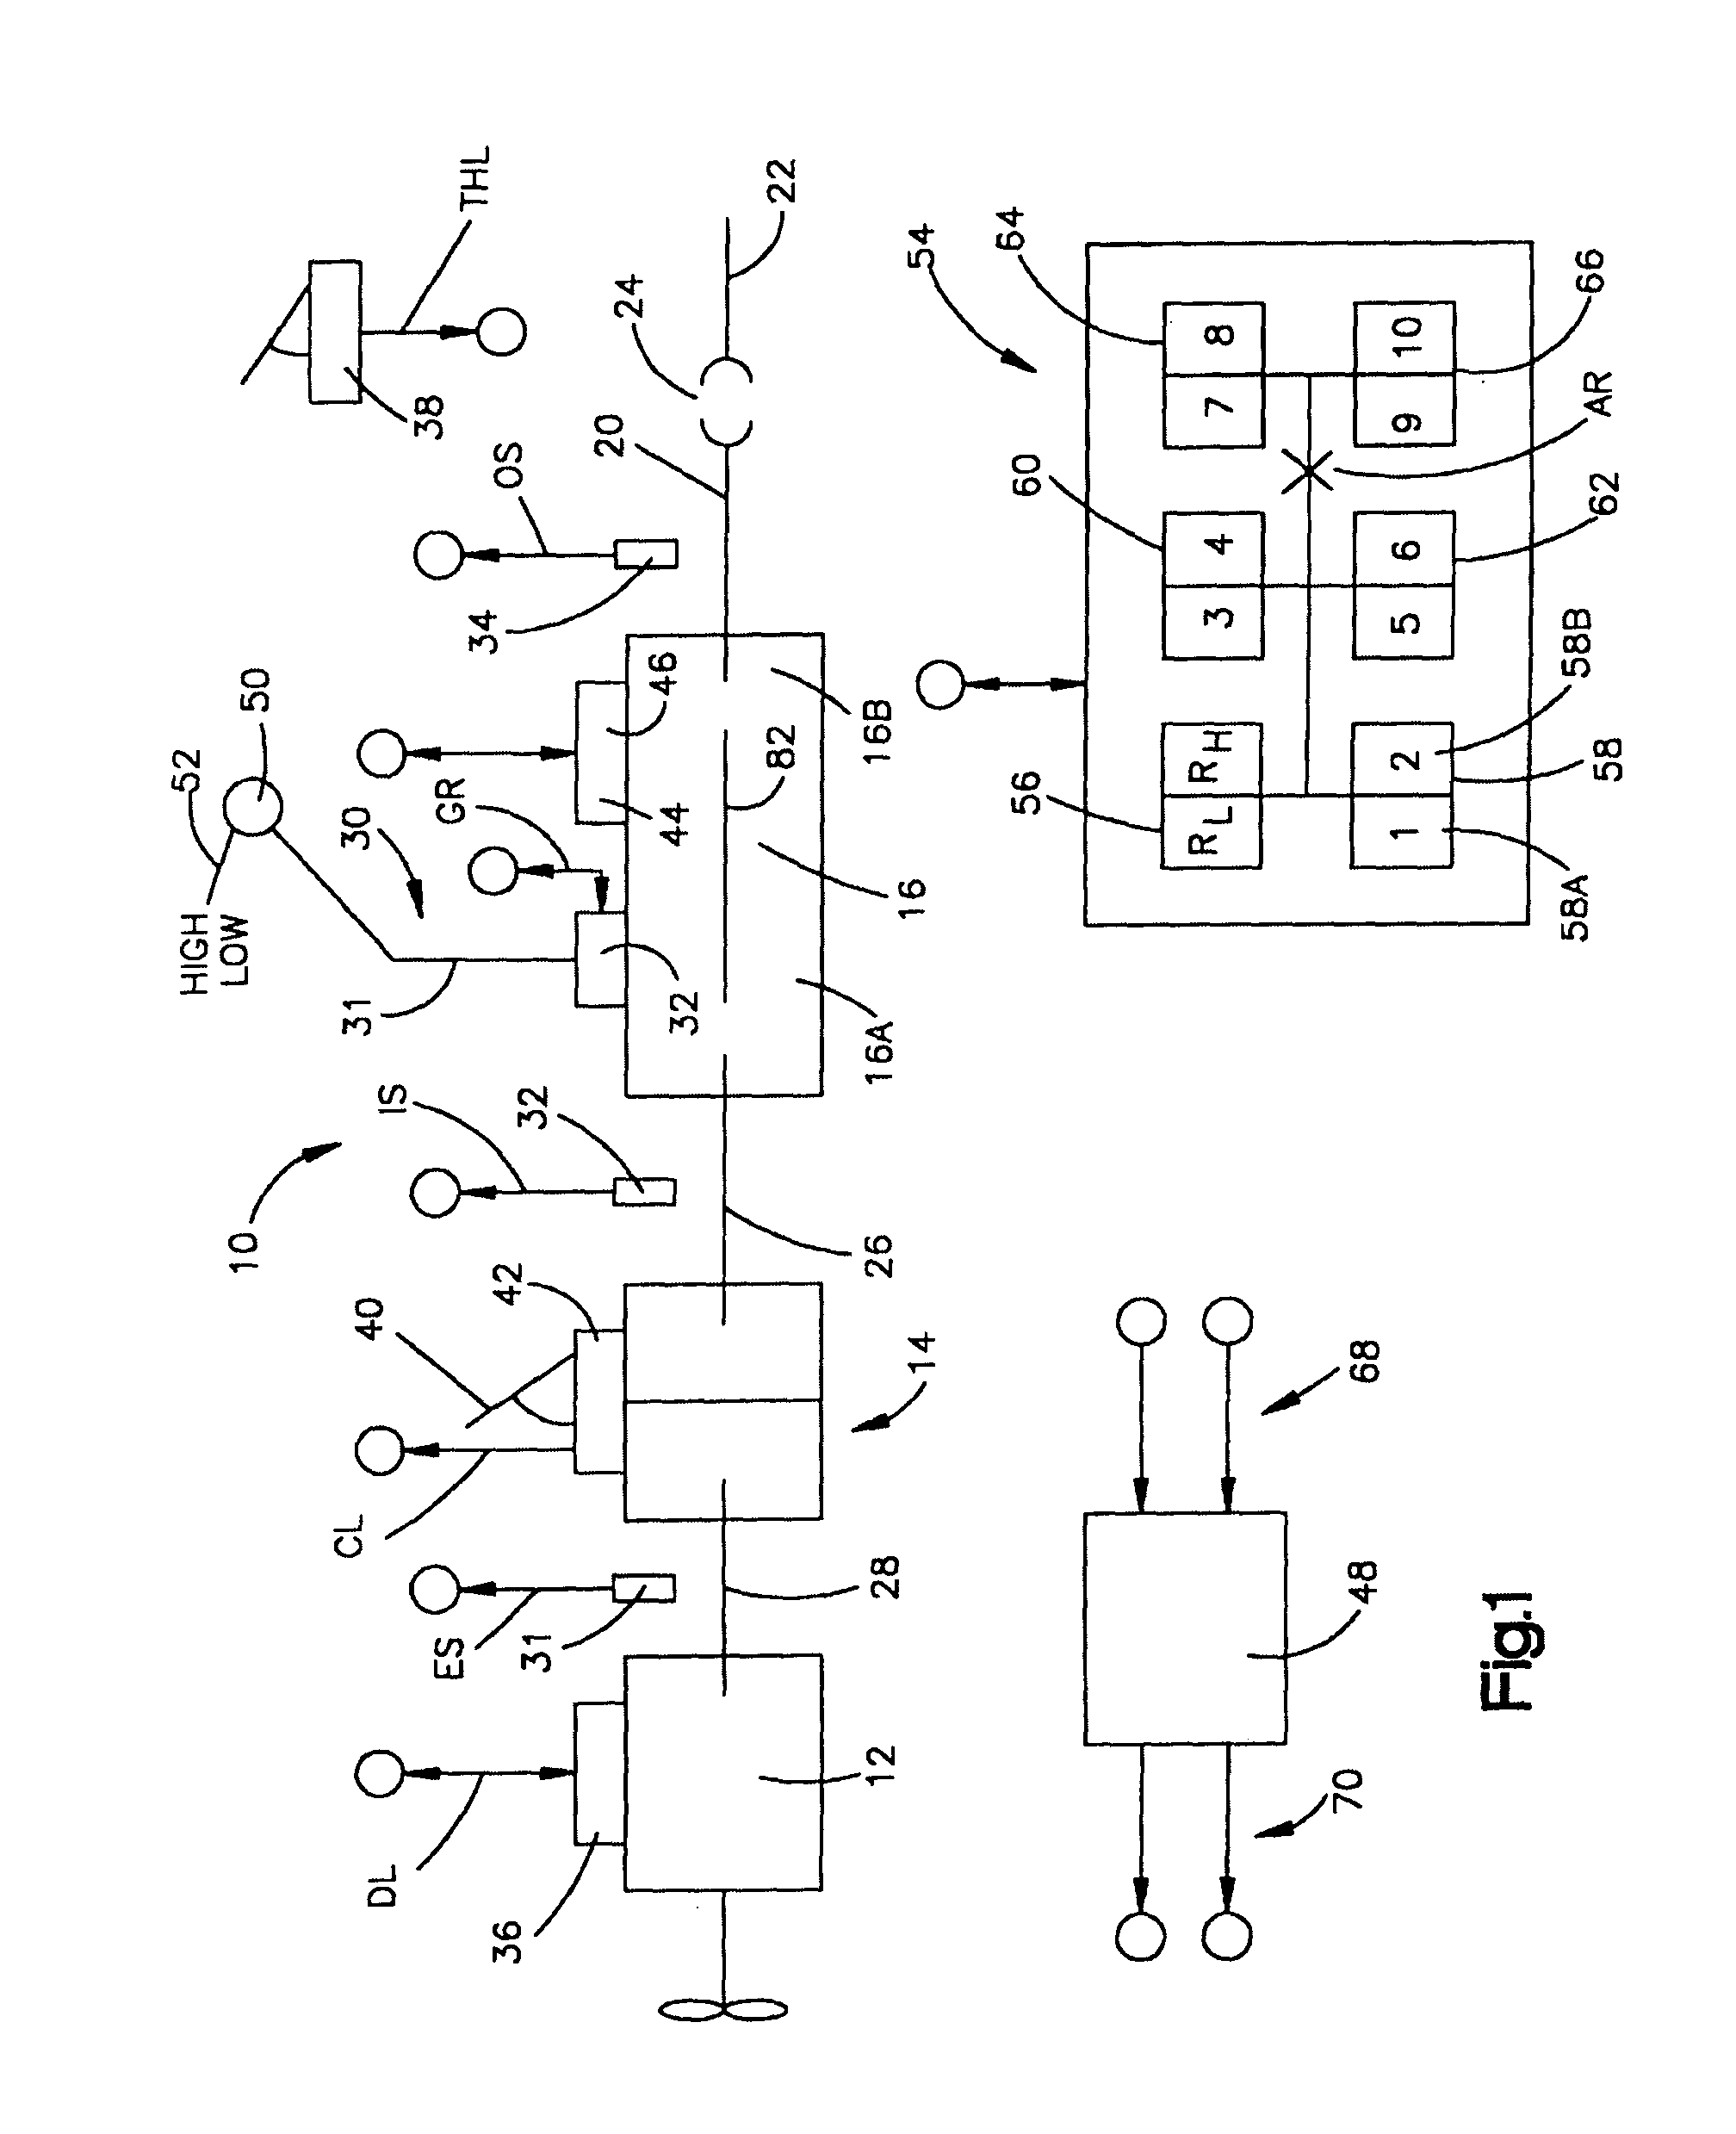 Automatic range up-shift control and method of operation